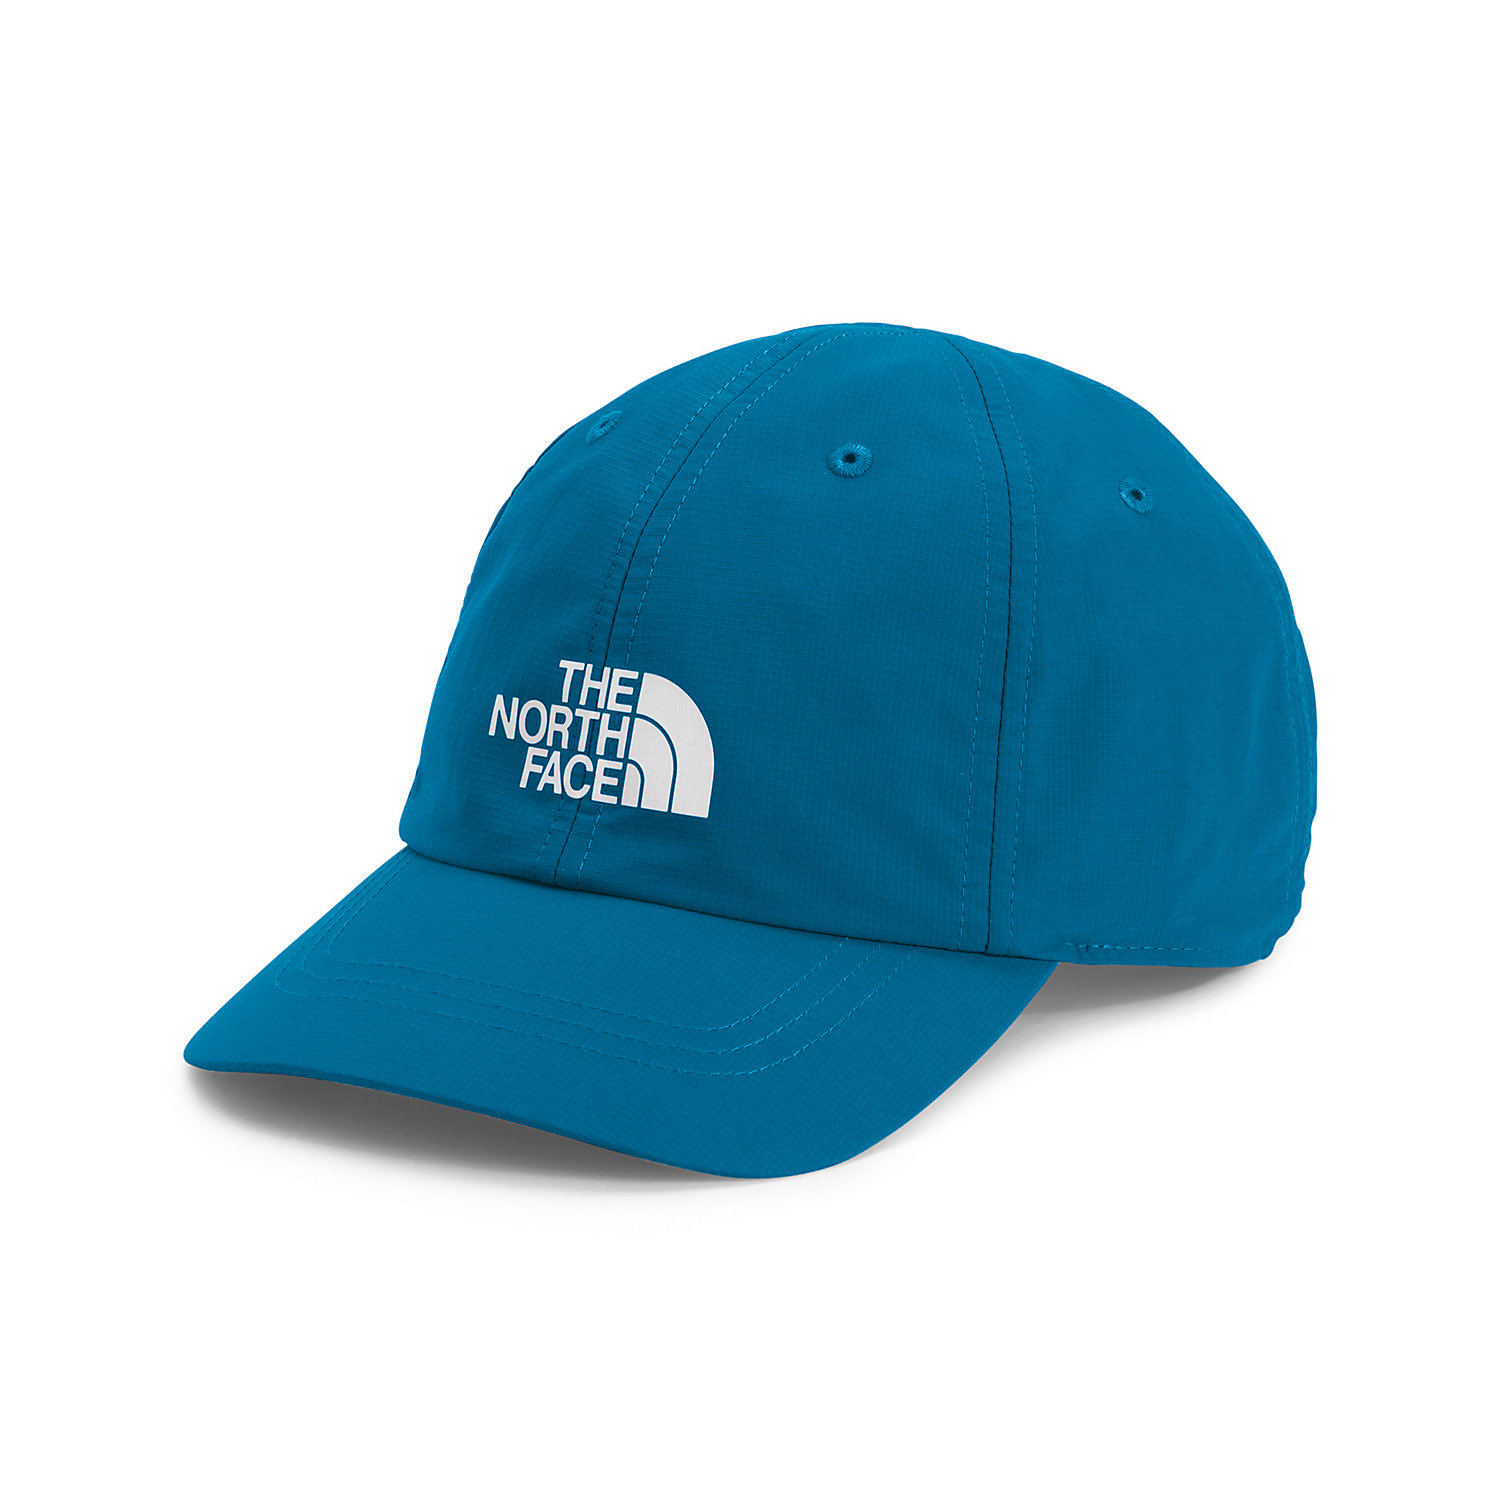 The North Face Youth Horizon Hat